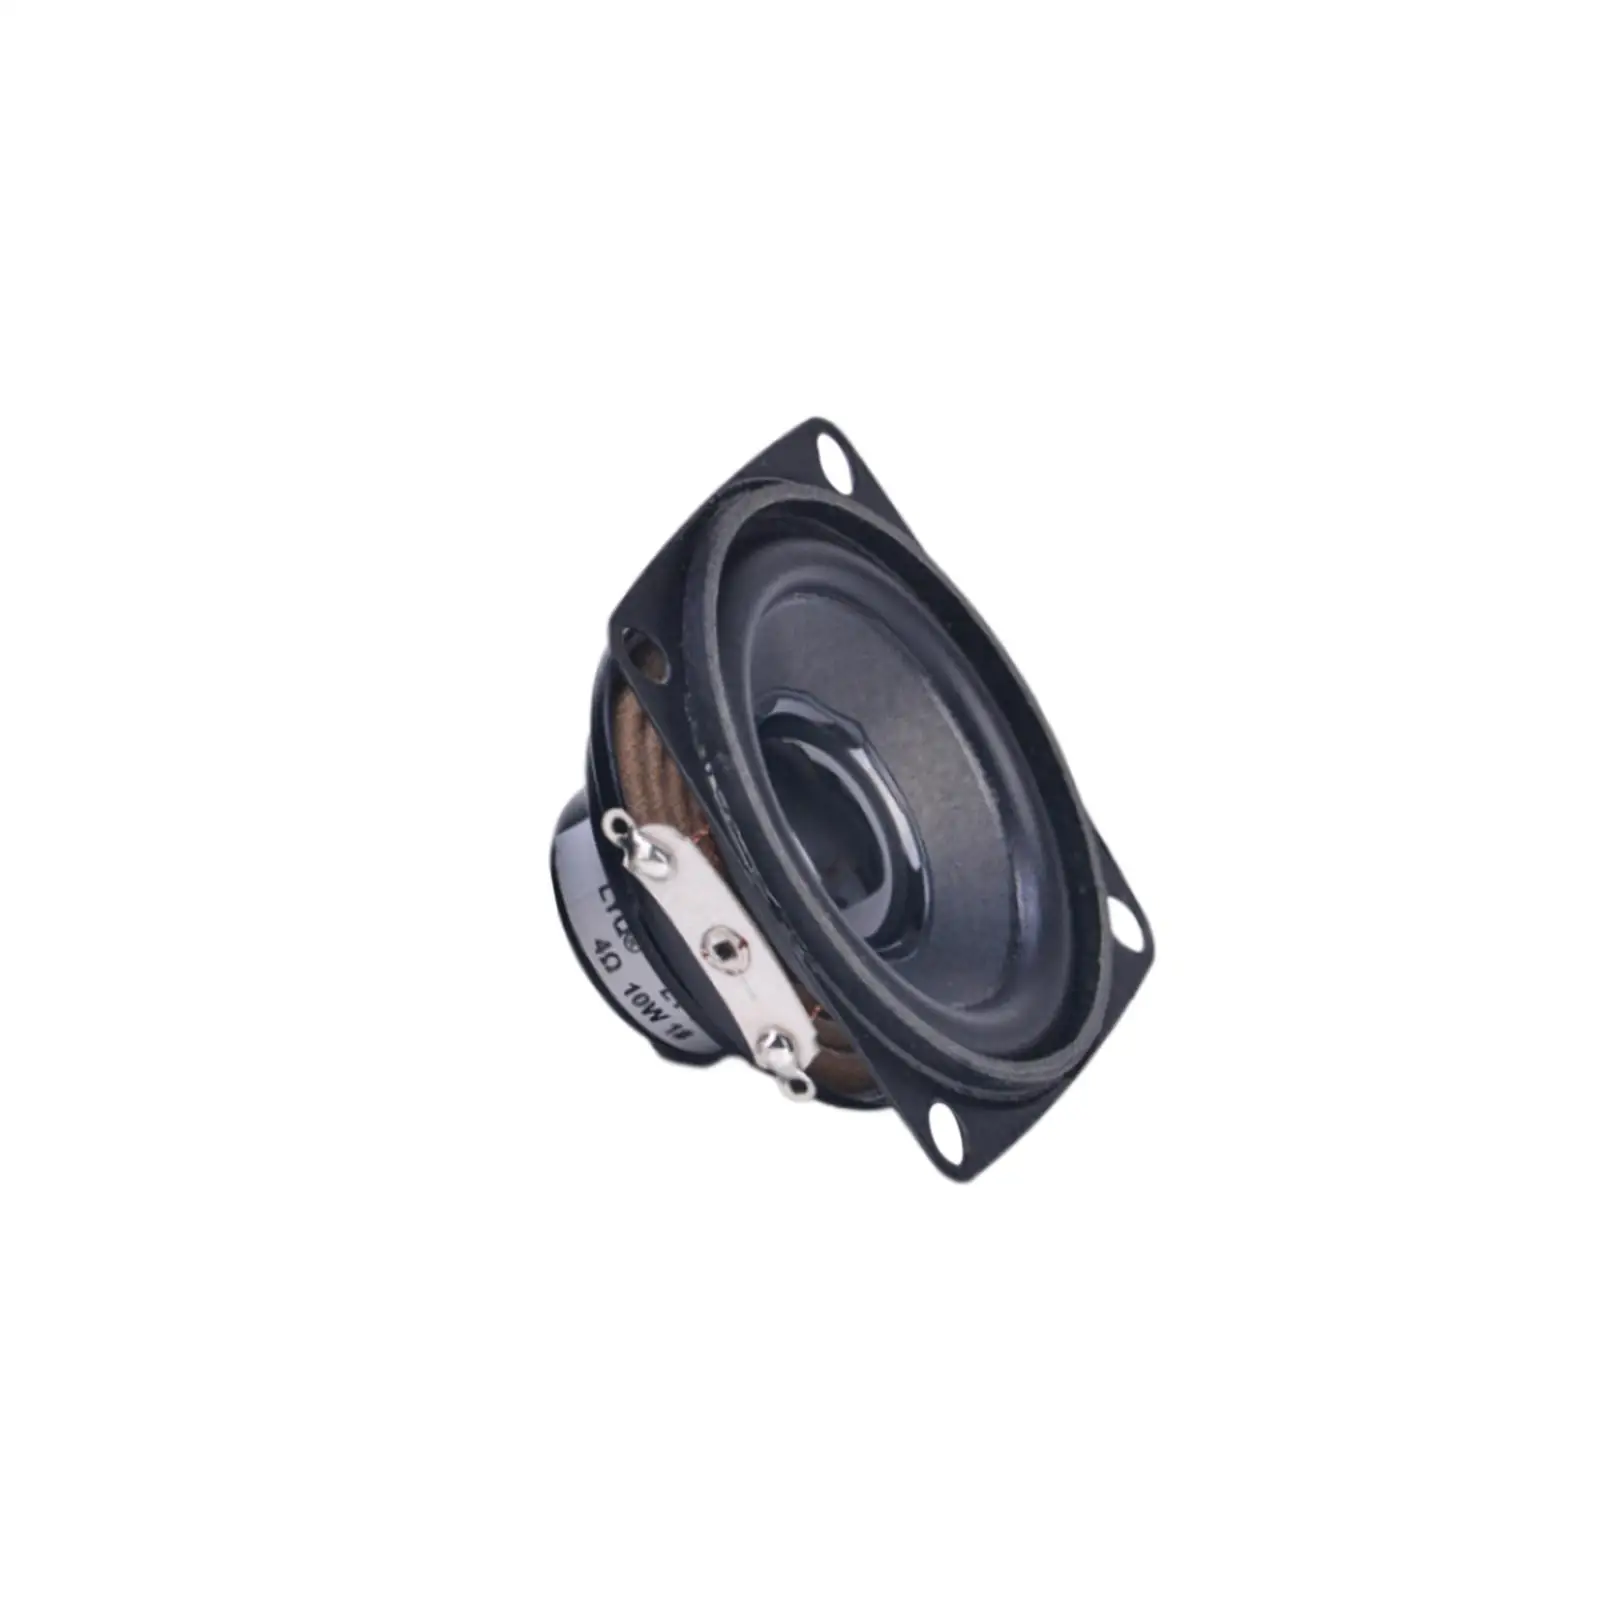 Woofer Subwoofer Speaker 4 Bass Stable Player Vehicle Replacement Speaker Midbass Woofer Travel Loudspeaker 53mm Classic Woofer